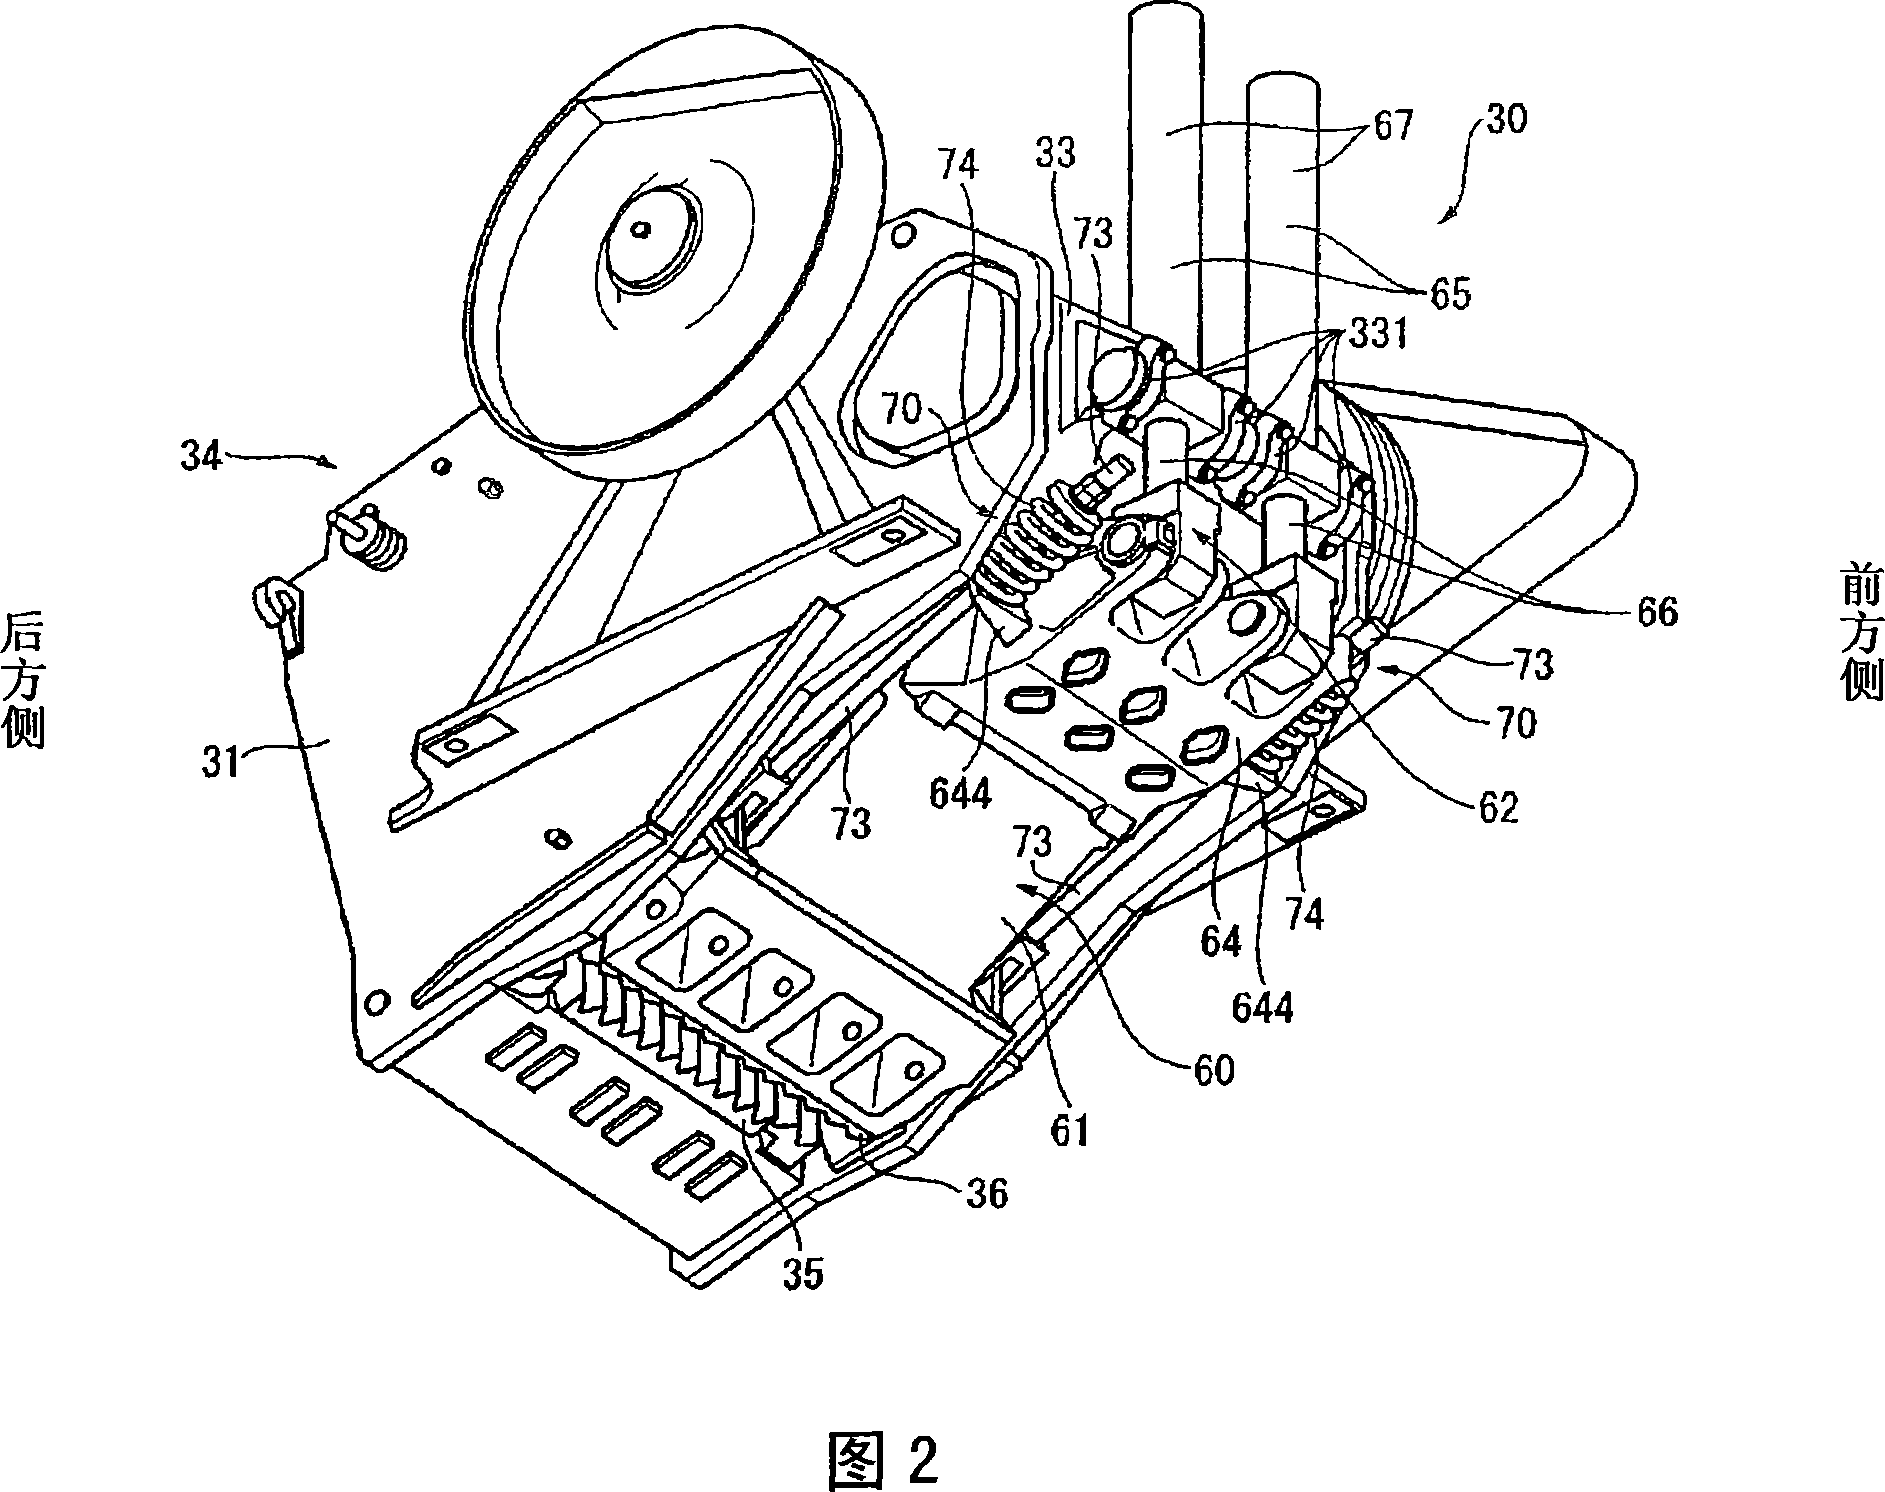 Jaw crusher and self-travelling crusher